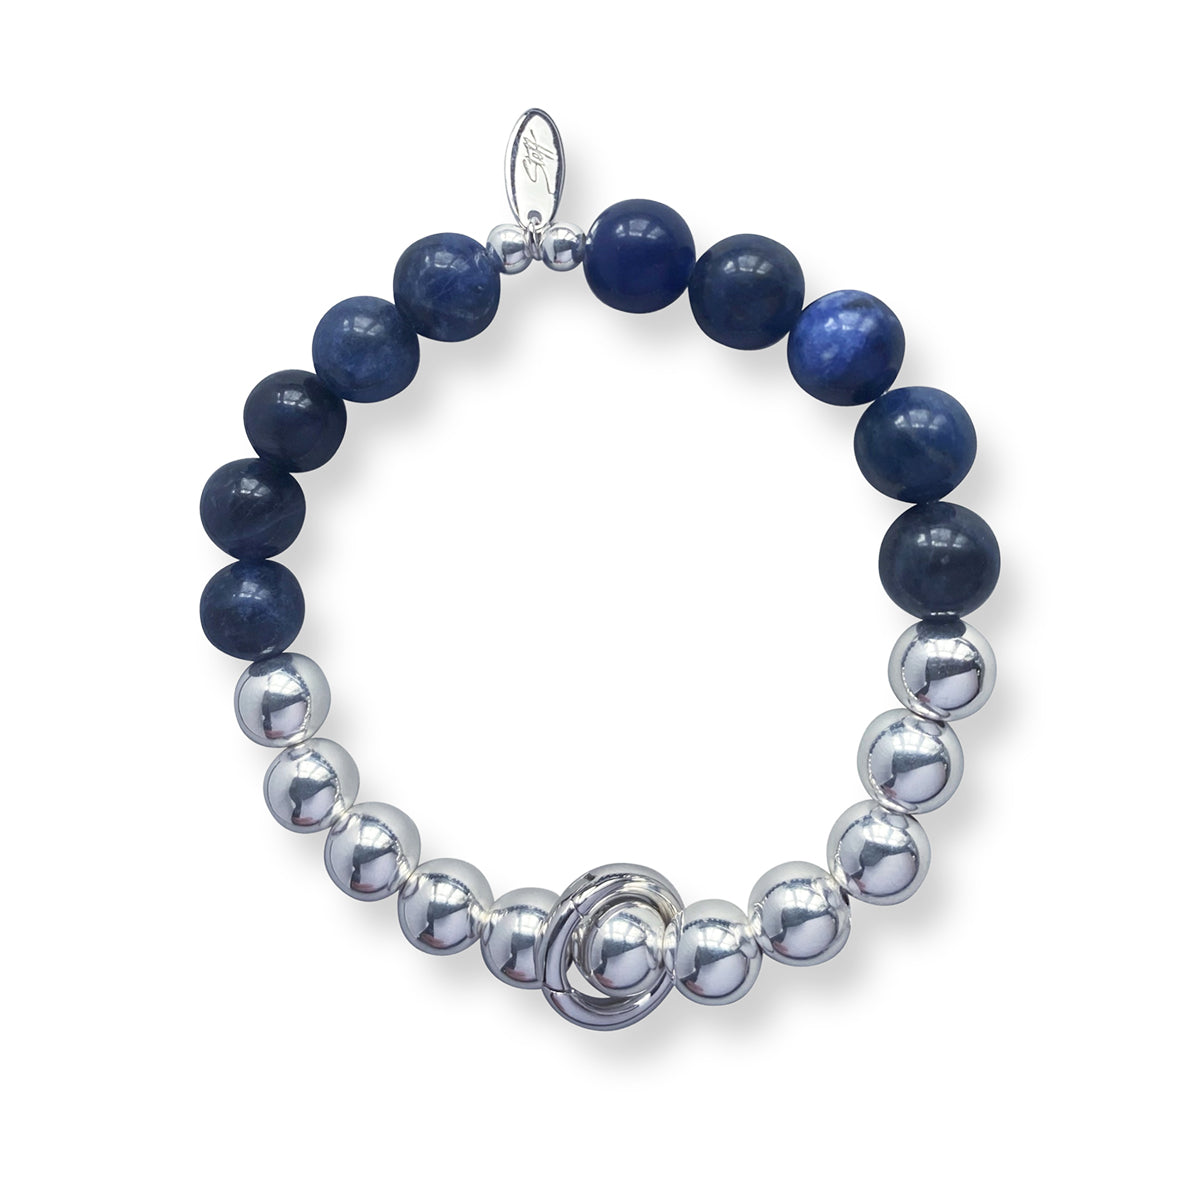 Steff Silver & Sodalite Bead Charm Bracelet with Interchangeable Charm Link